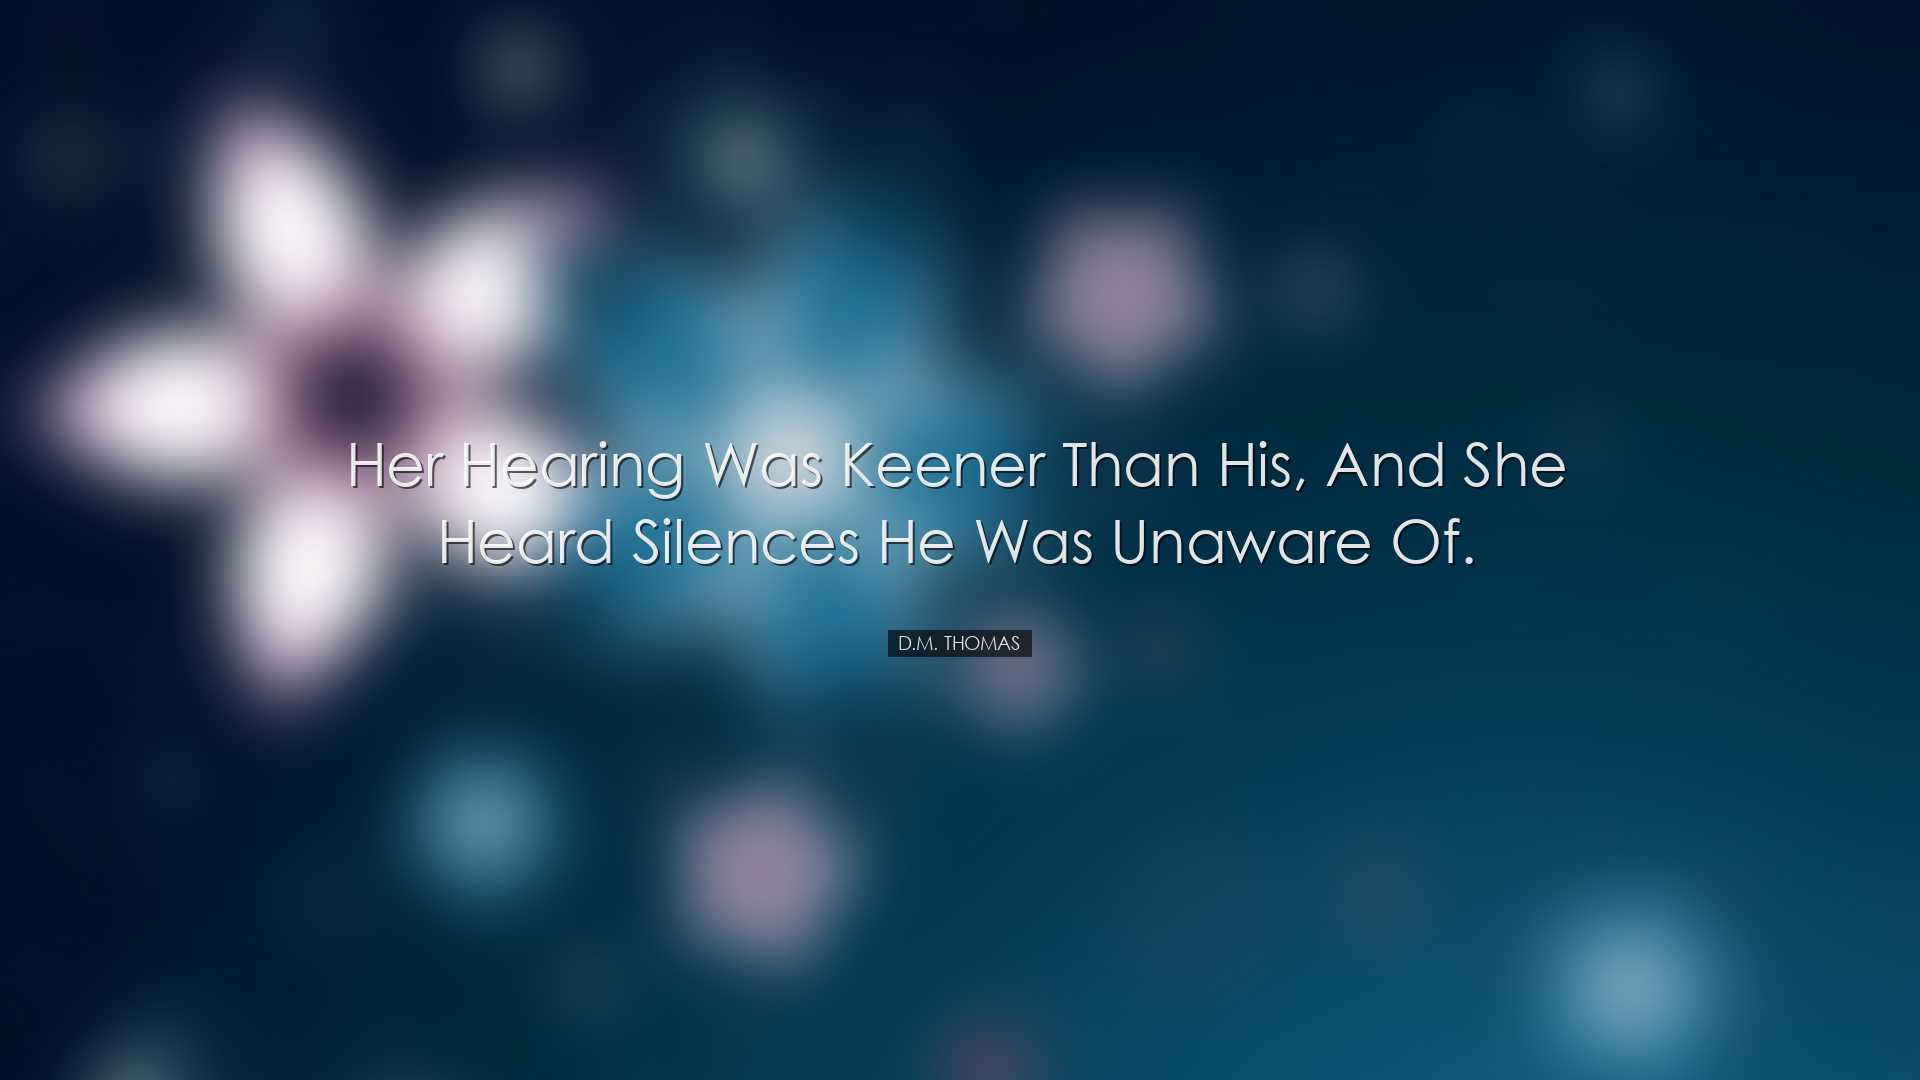 Her hearing was keener than his, and she heard silences he was una